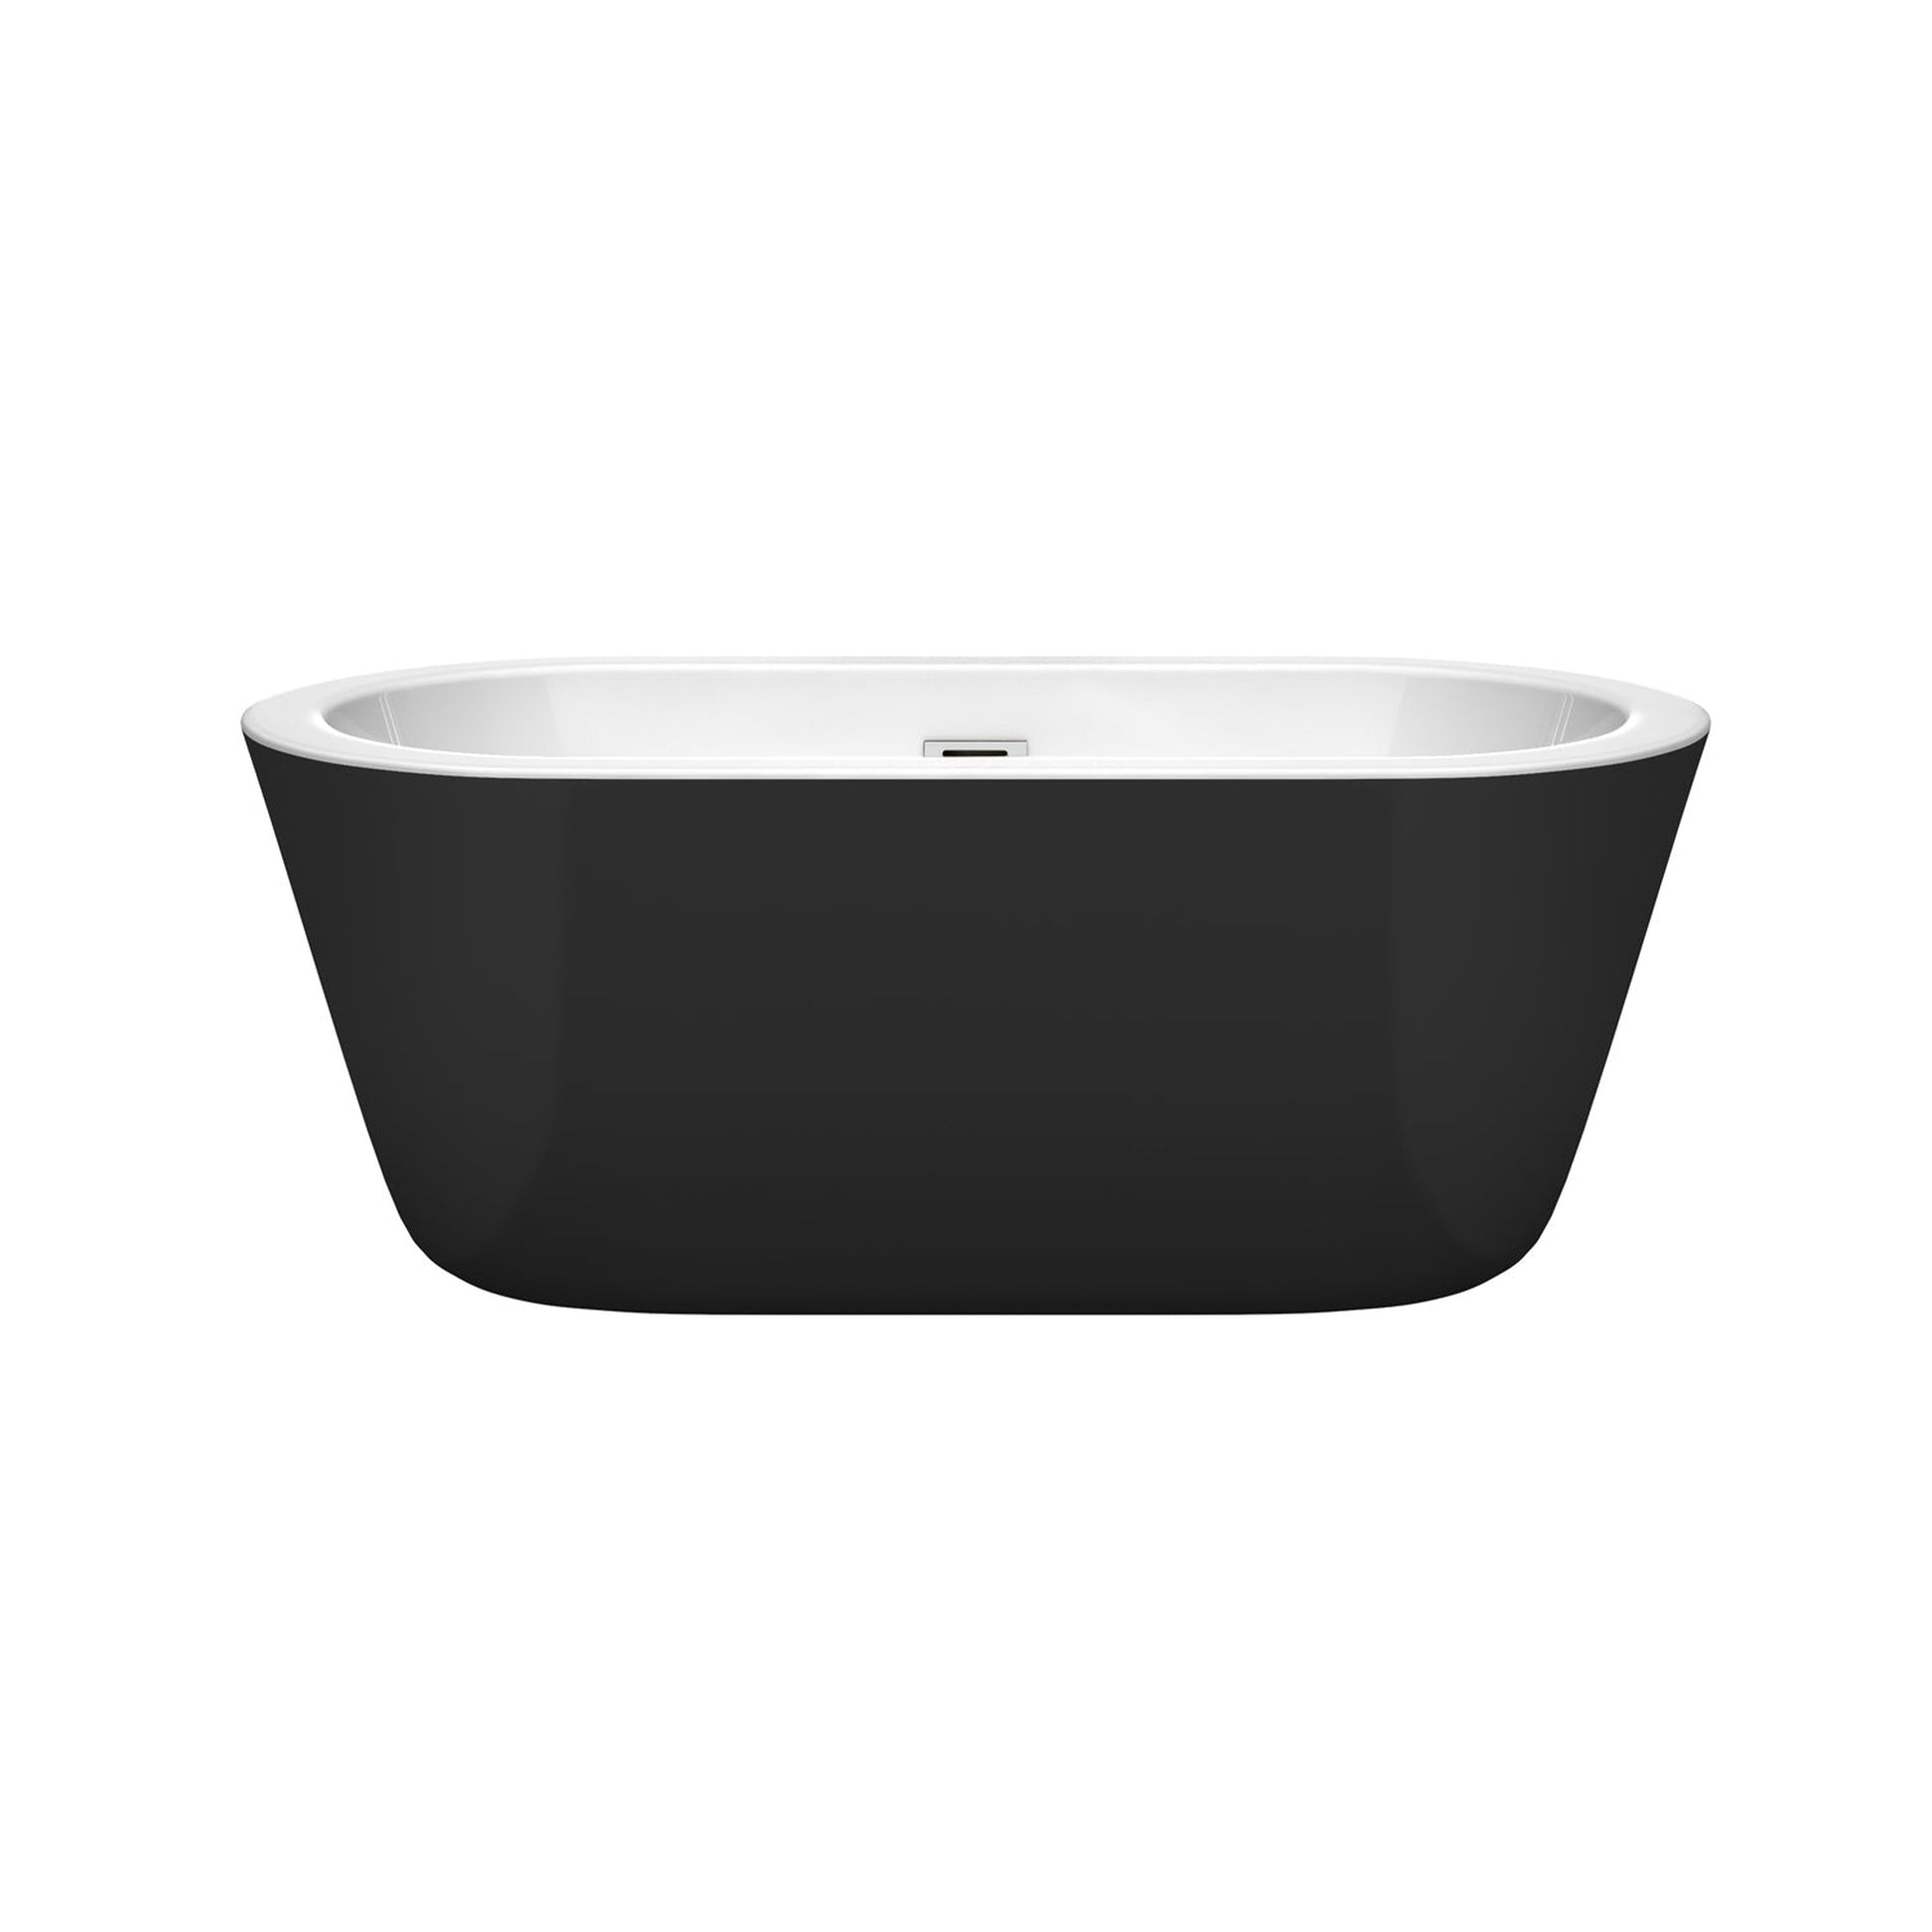 Wyndham Collection Mermaid 60" Freestanding Bathtub in Black With White Interior With Polished Chrome Drain and Overflow Trim